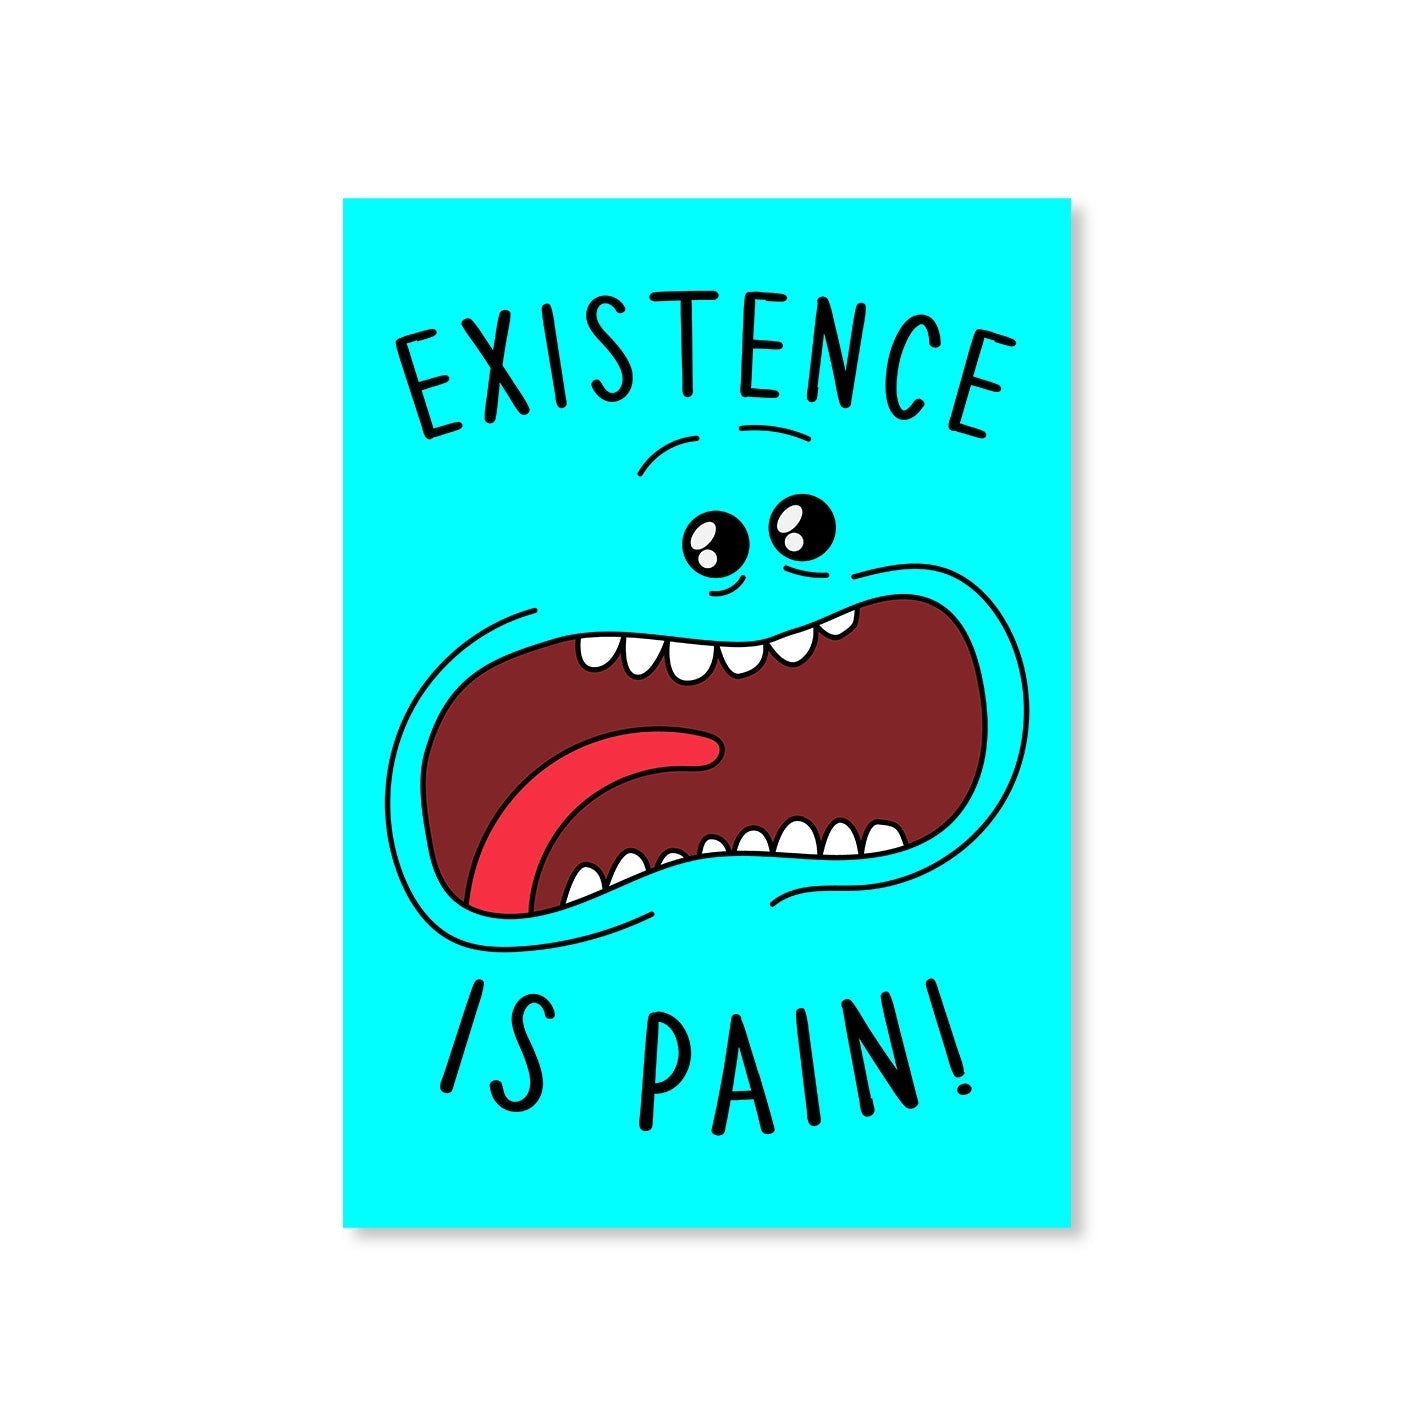 rick and morty existence is pain poster wall art buy online united states of america usa the banyan tee tbt a4 rick and morty online summer beth mr meeseeks jerry quote vector art clothing accessories merchandise